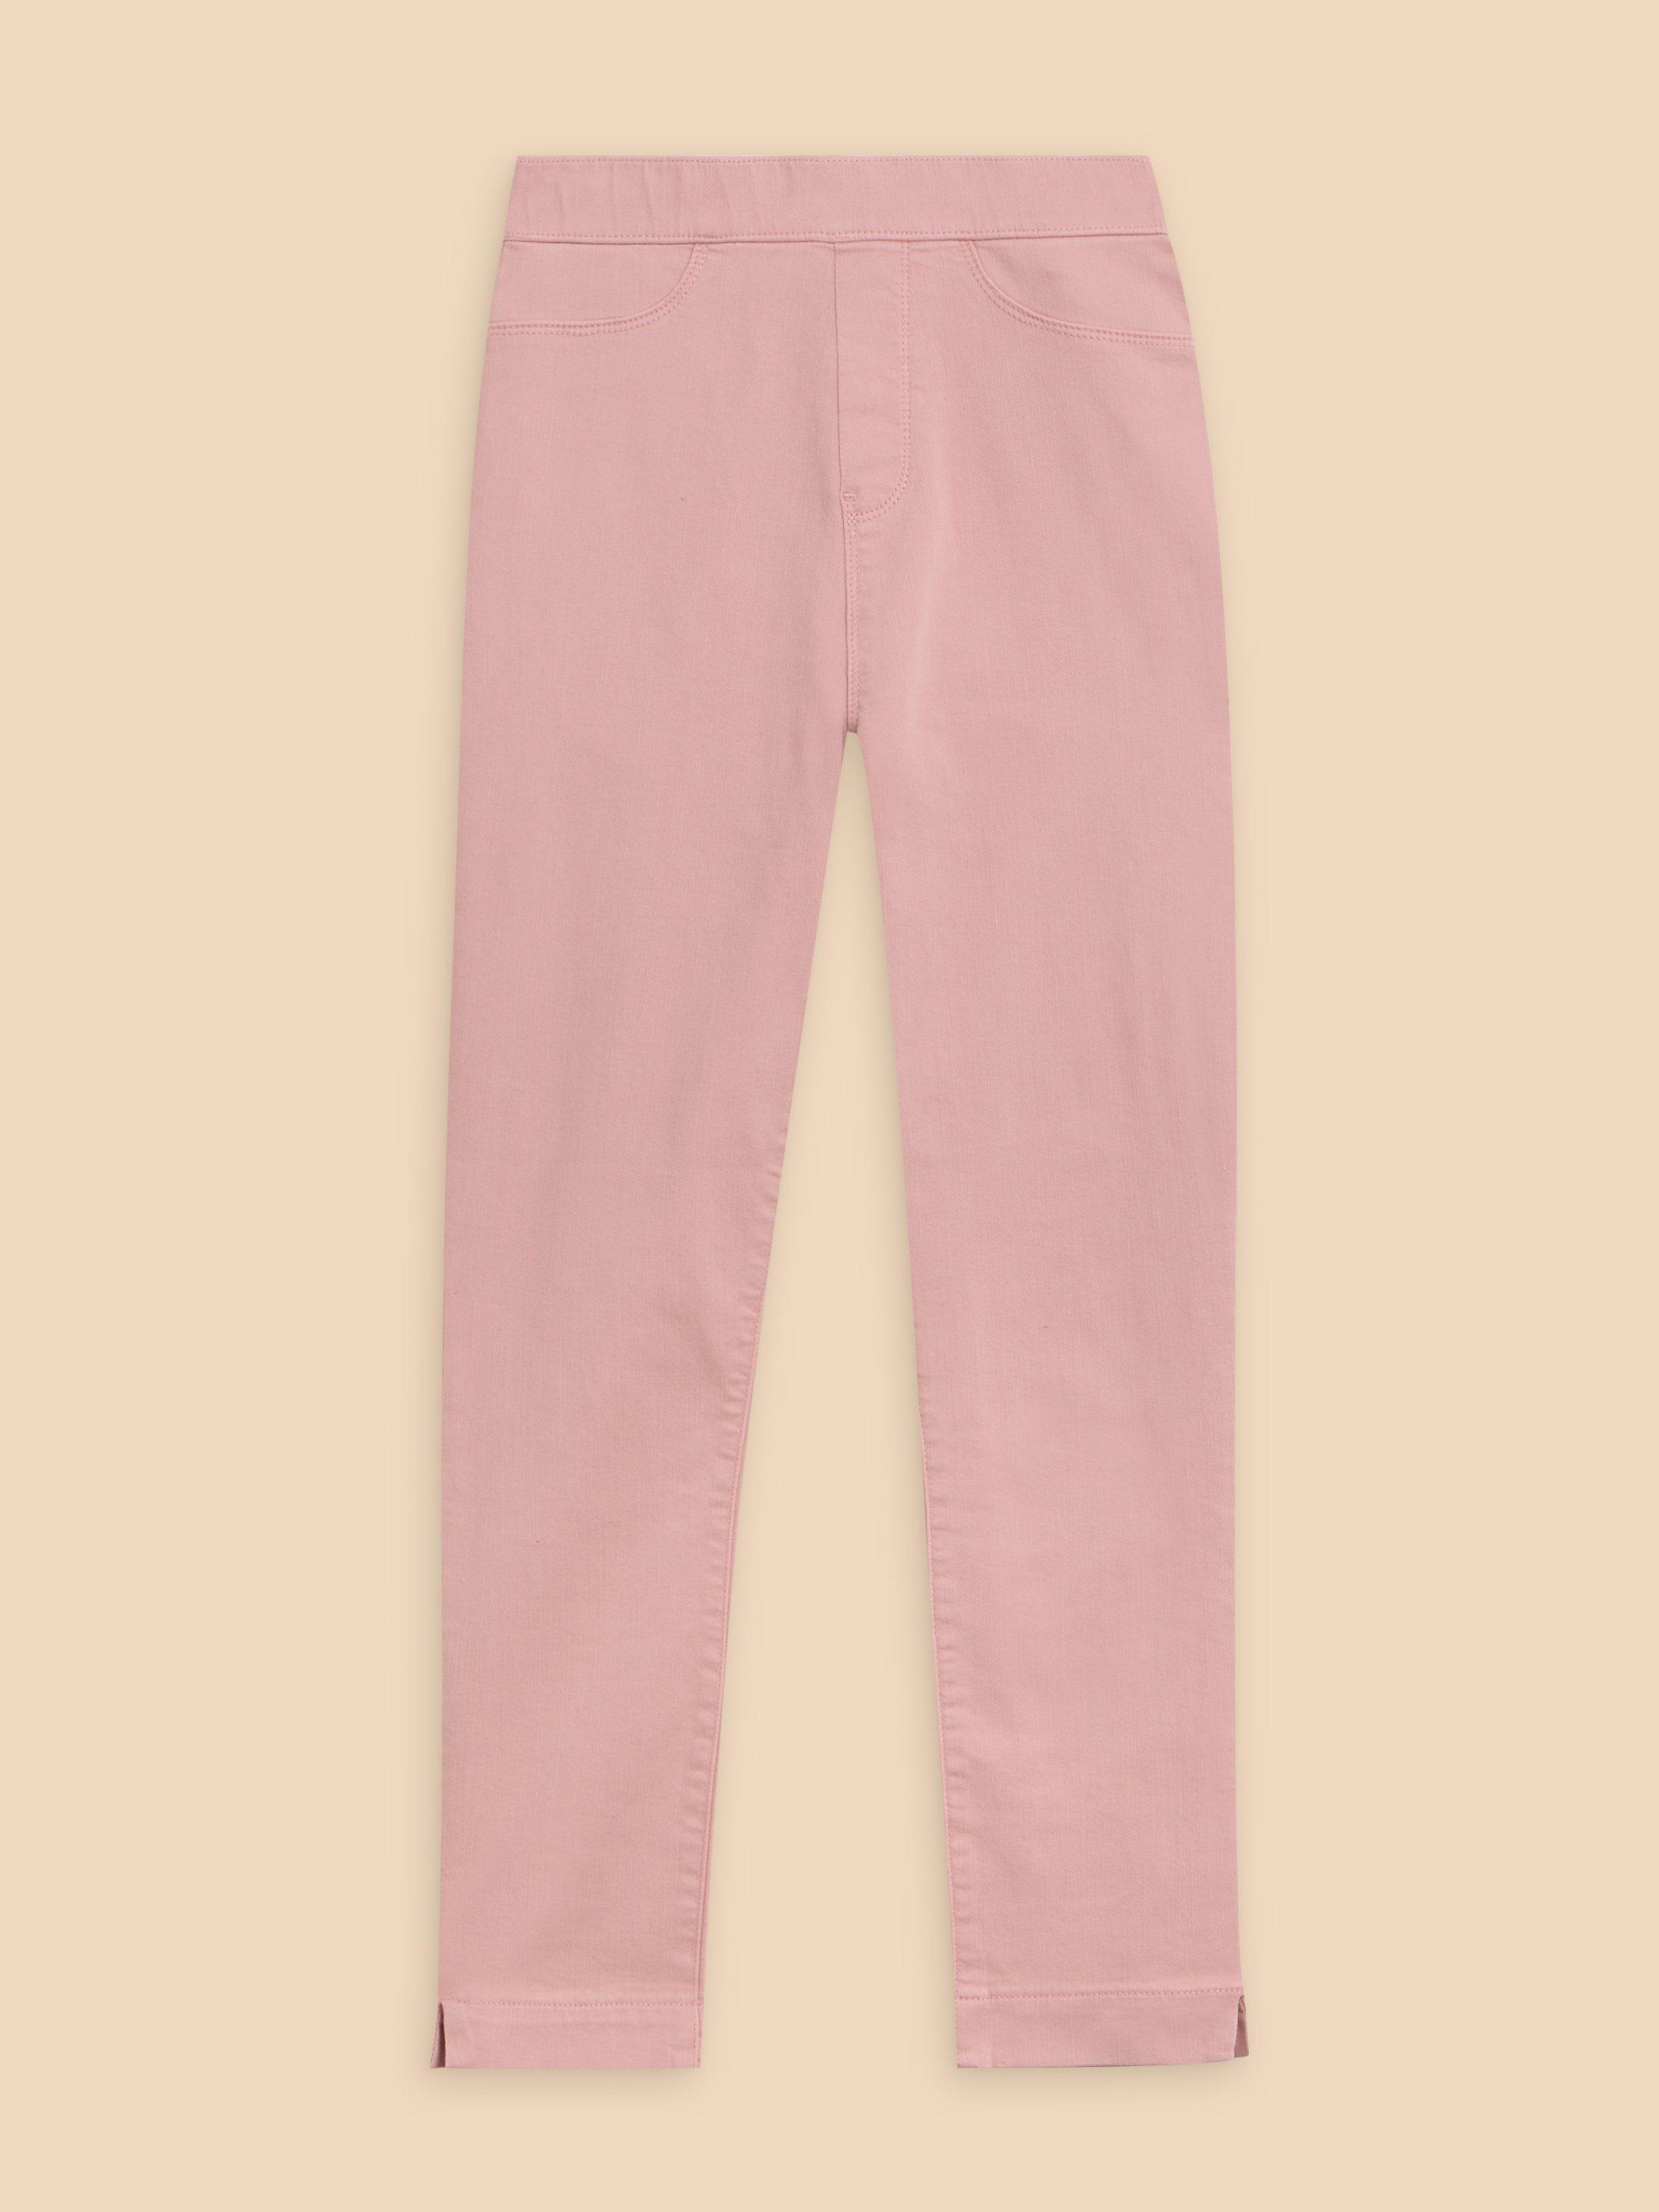 Janey Cotton Cropped Jegging in MID PINK - FLAT FRONT